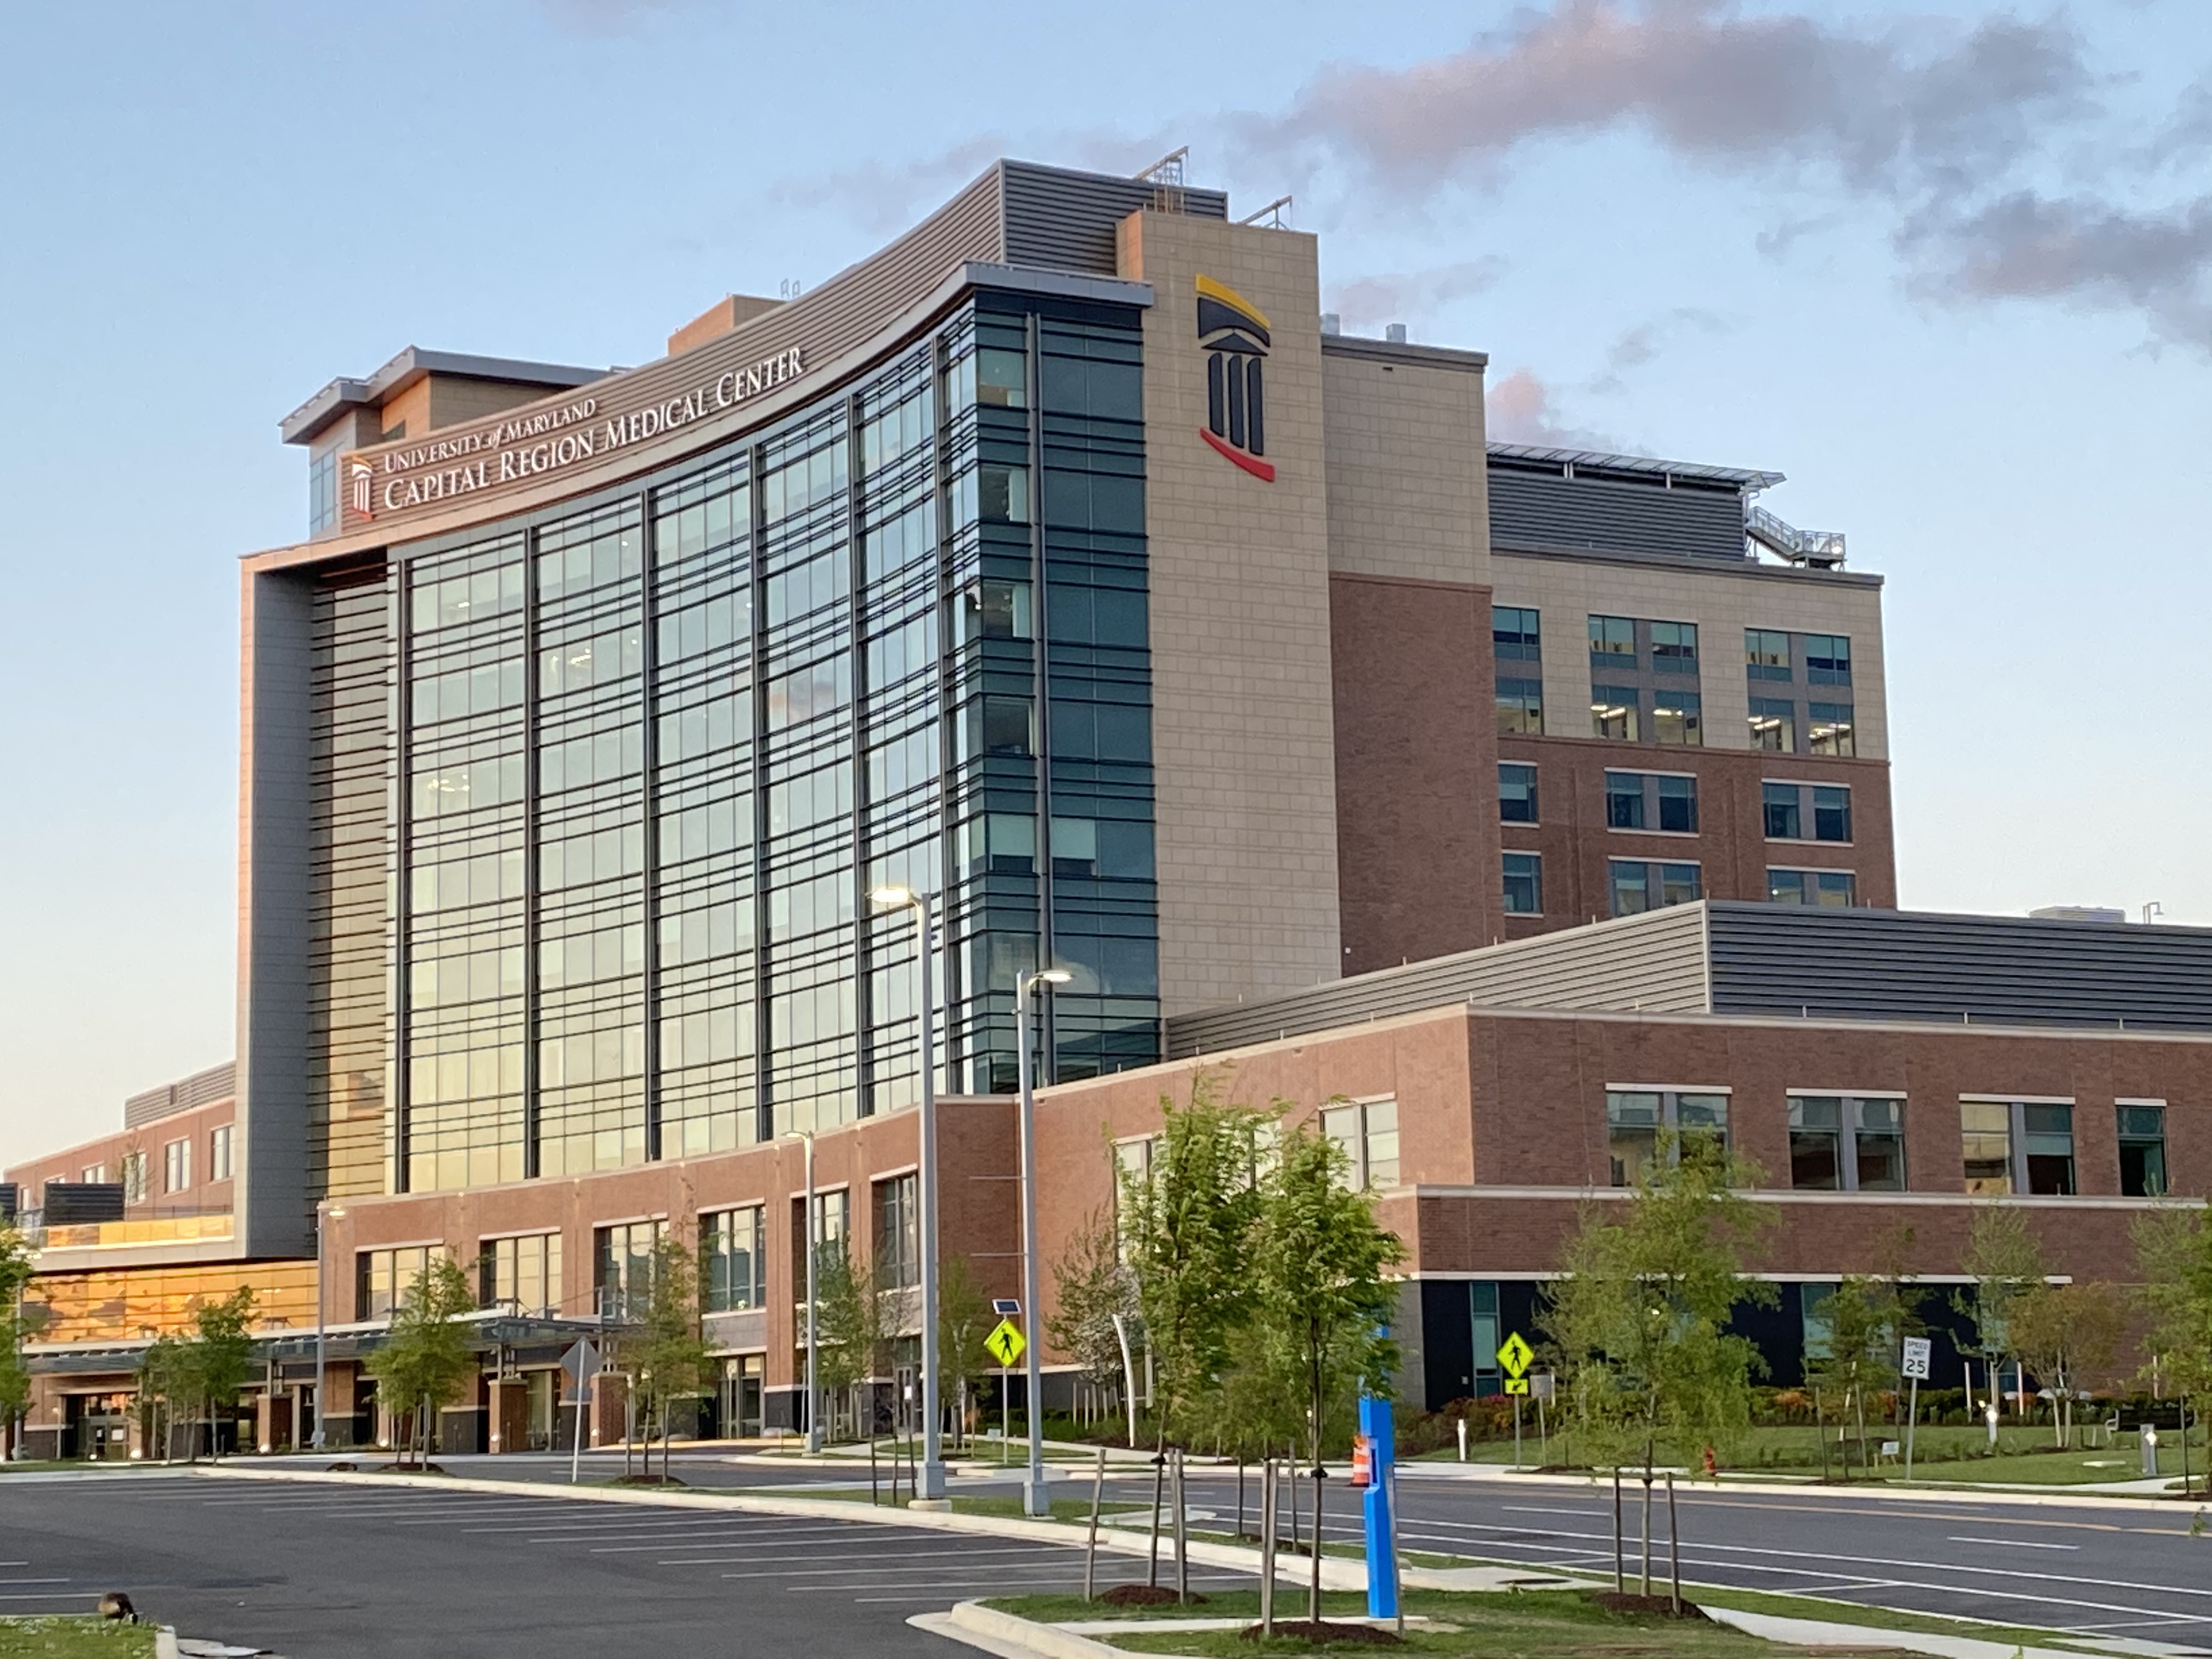 What does the University of Maryland hospital specialize in?